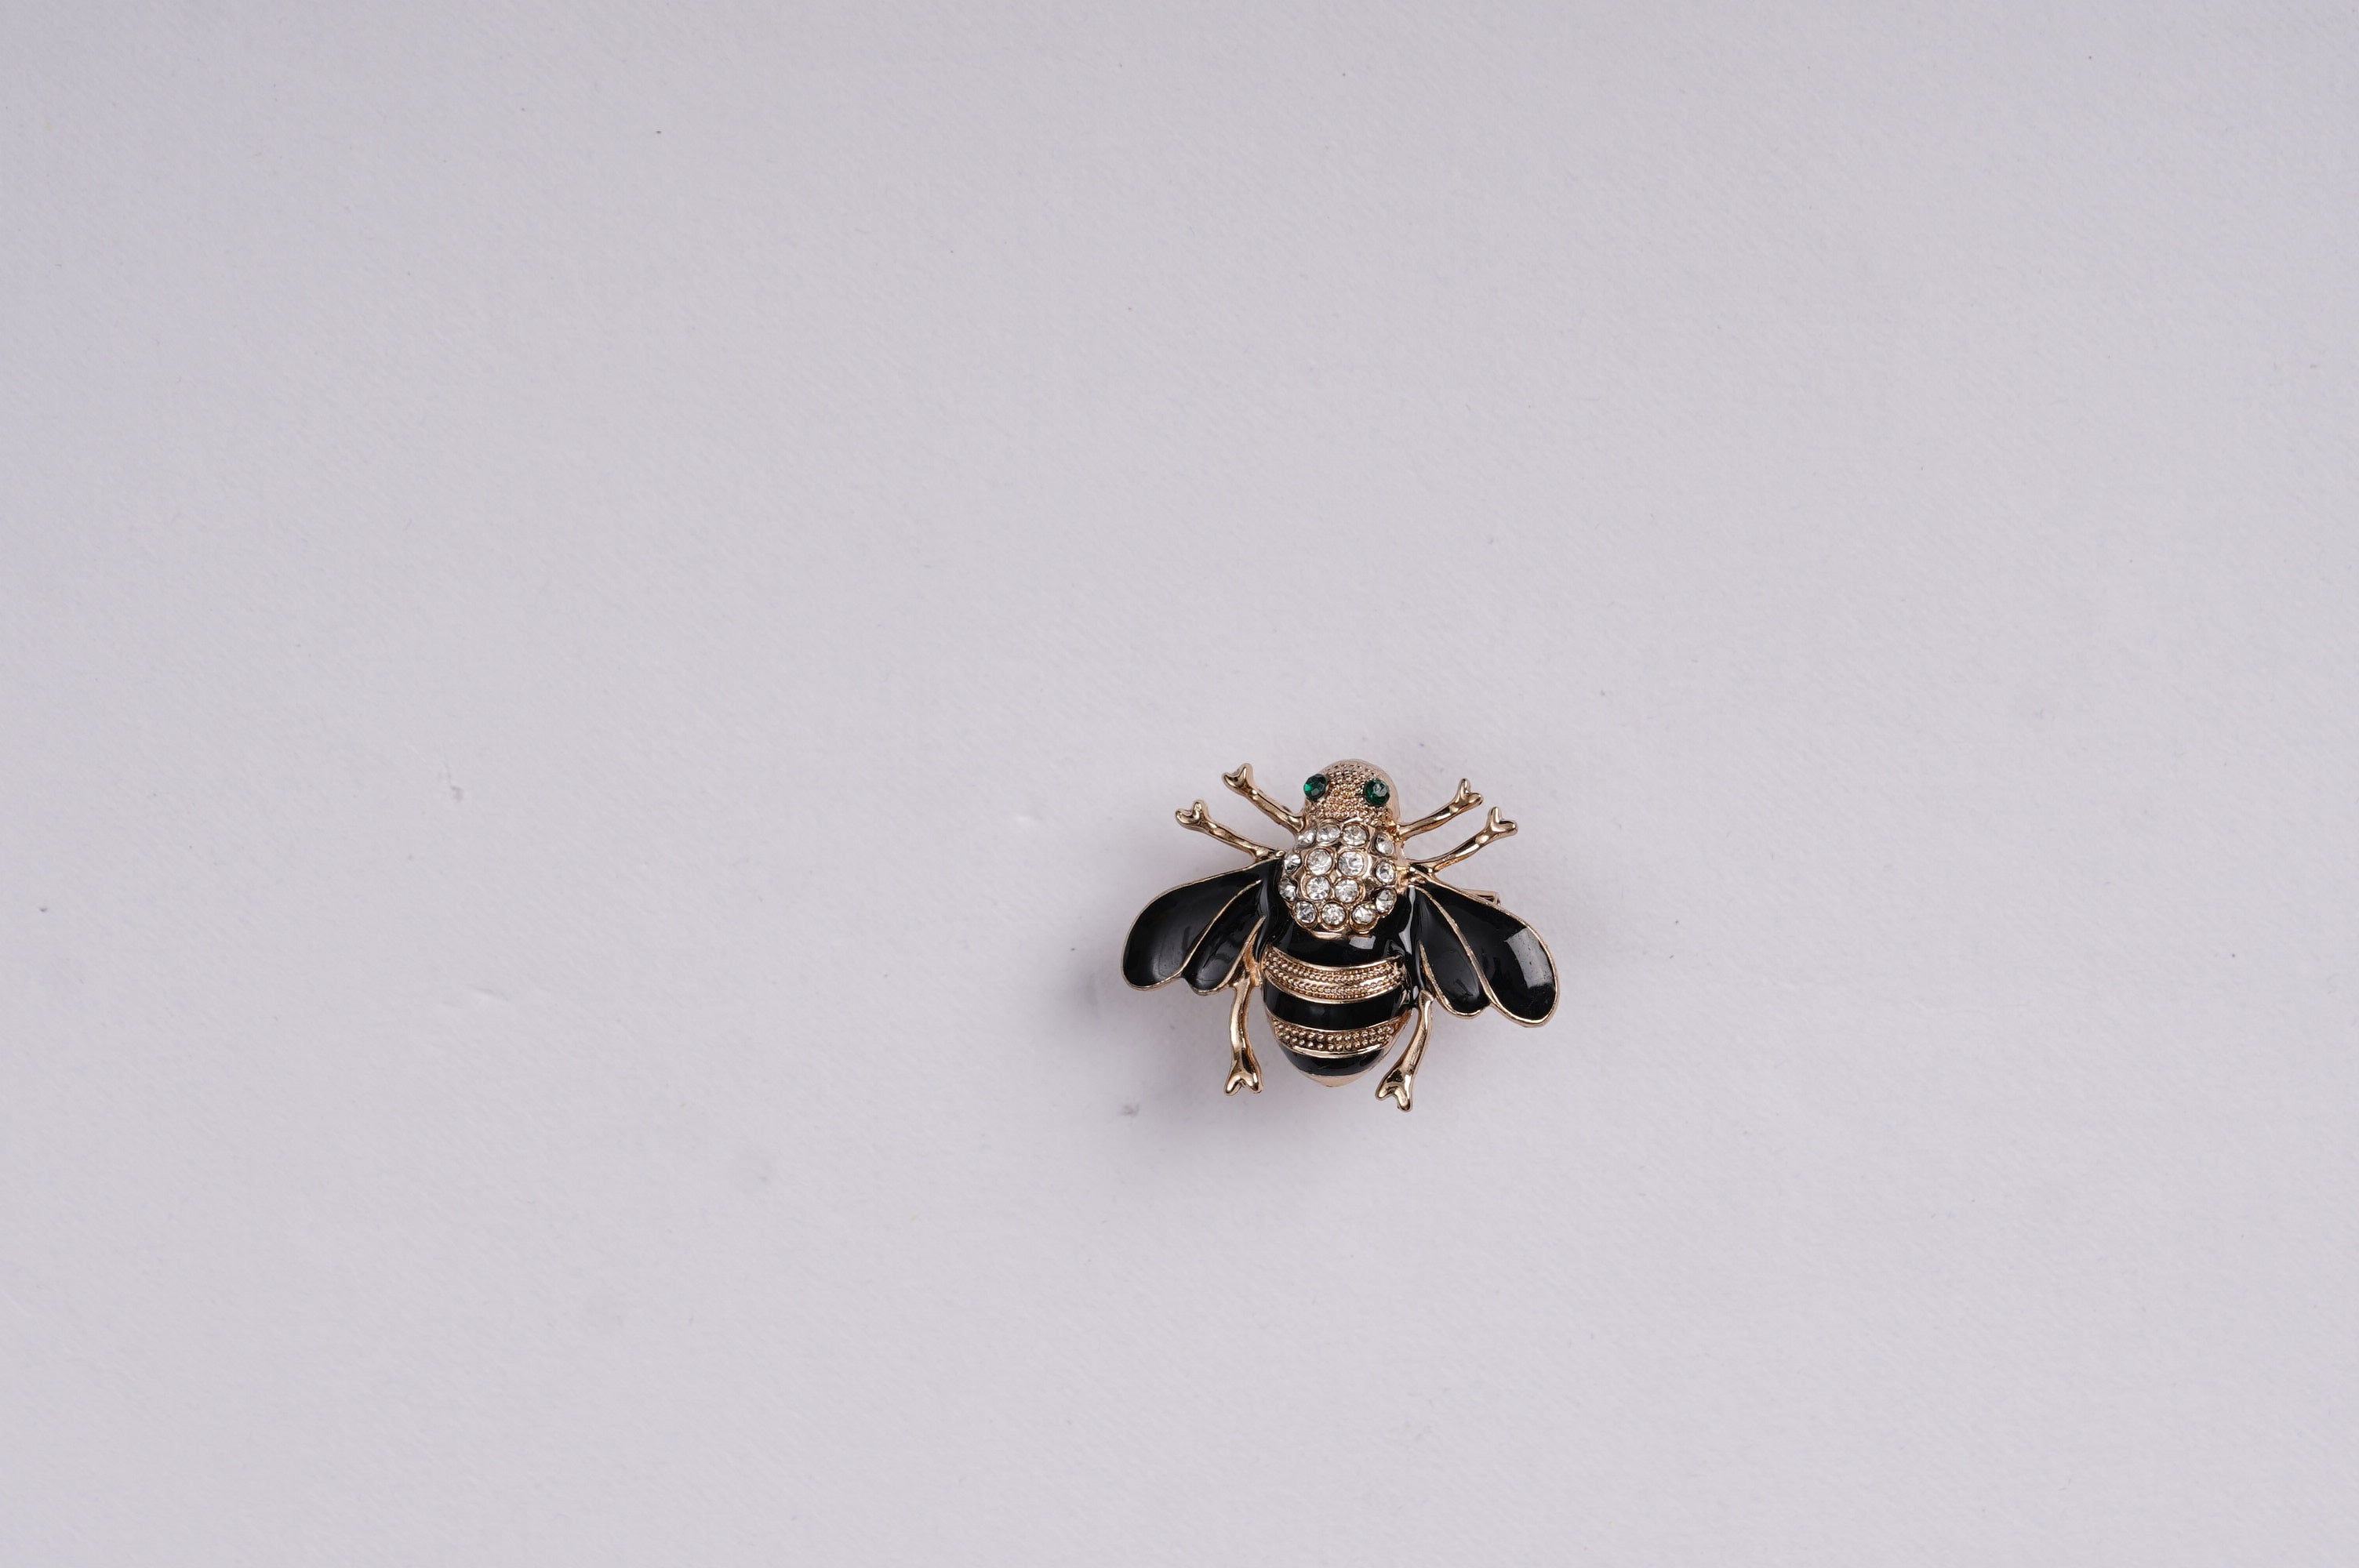 STUNNING BLACK & GOLD BEE INSECT BROOCH PIN